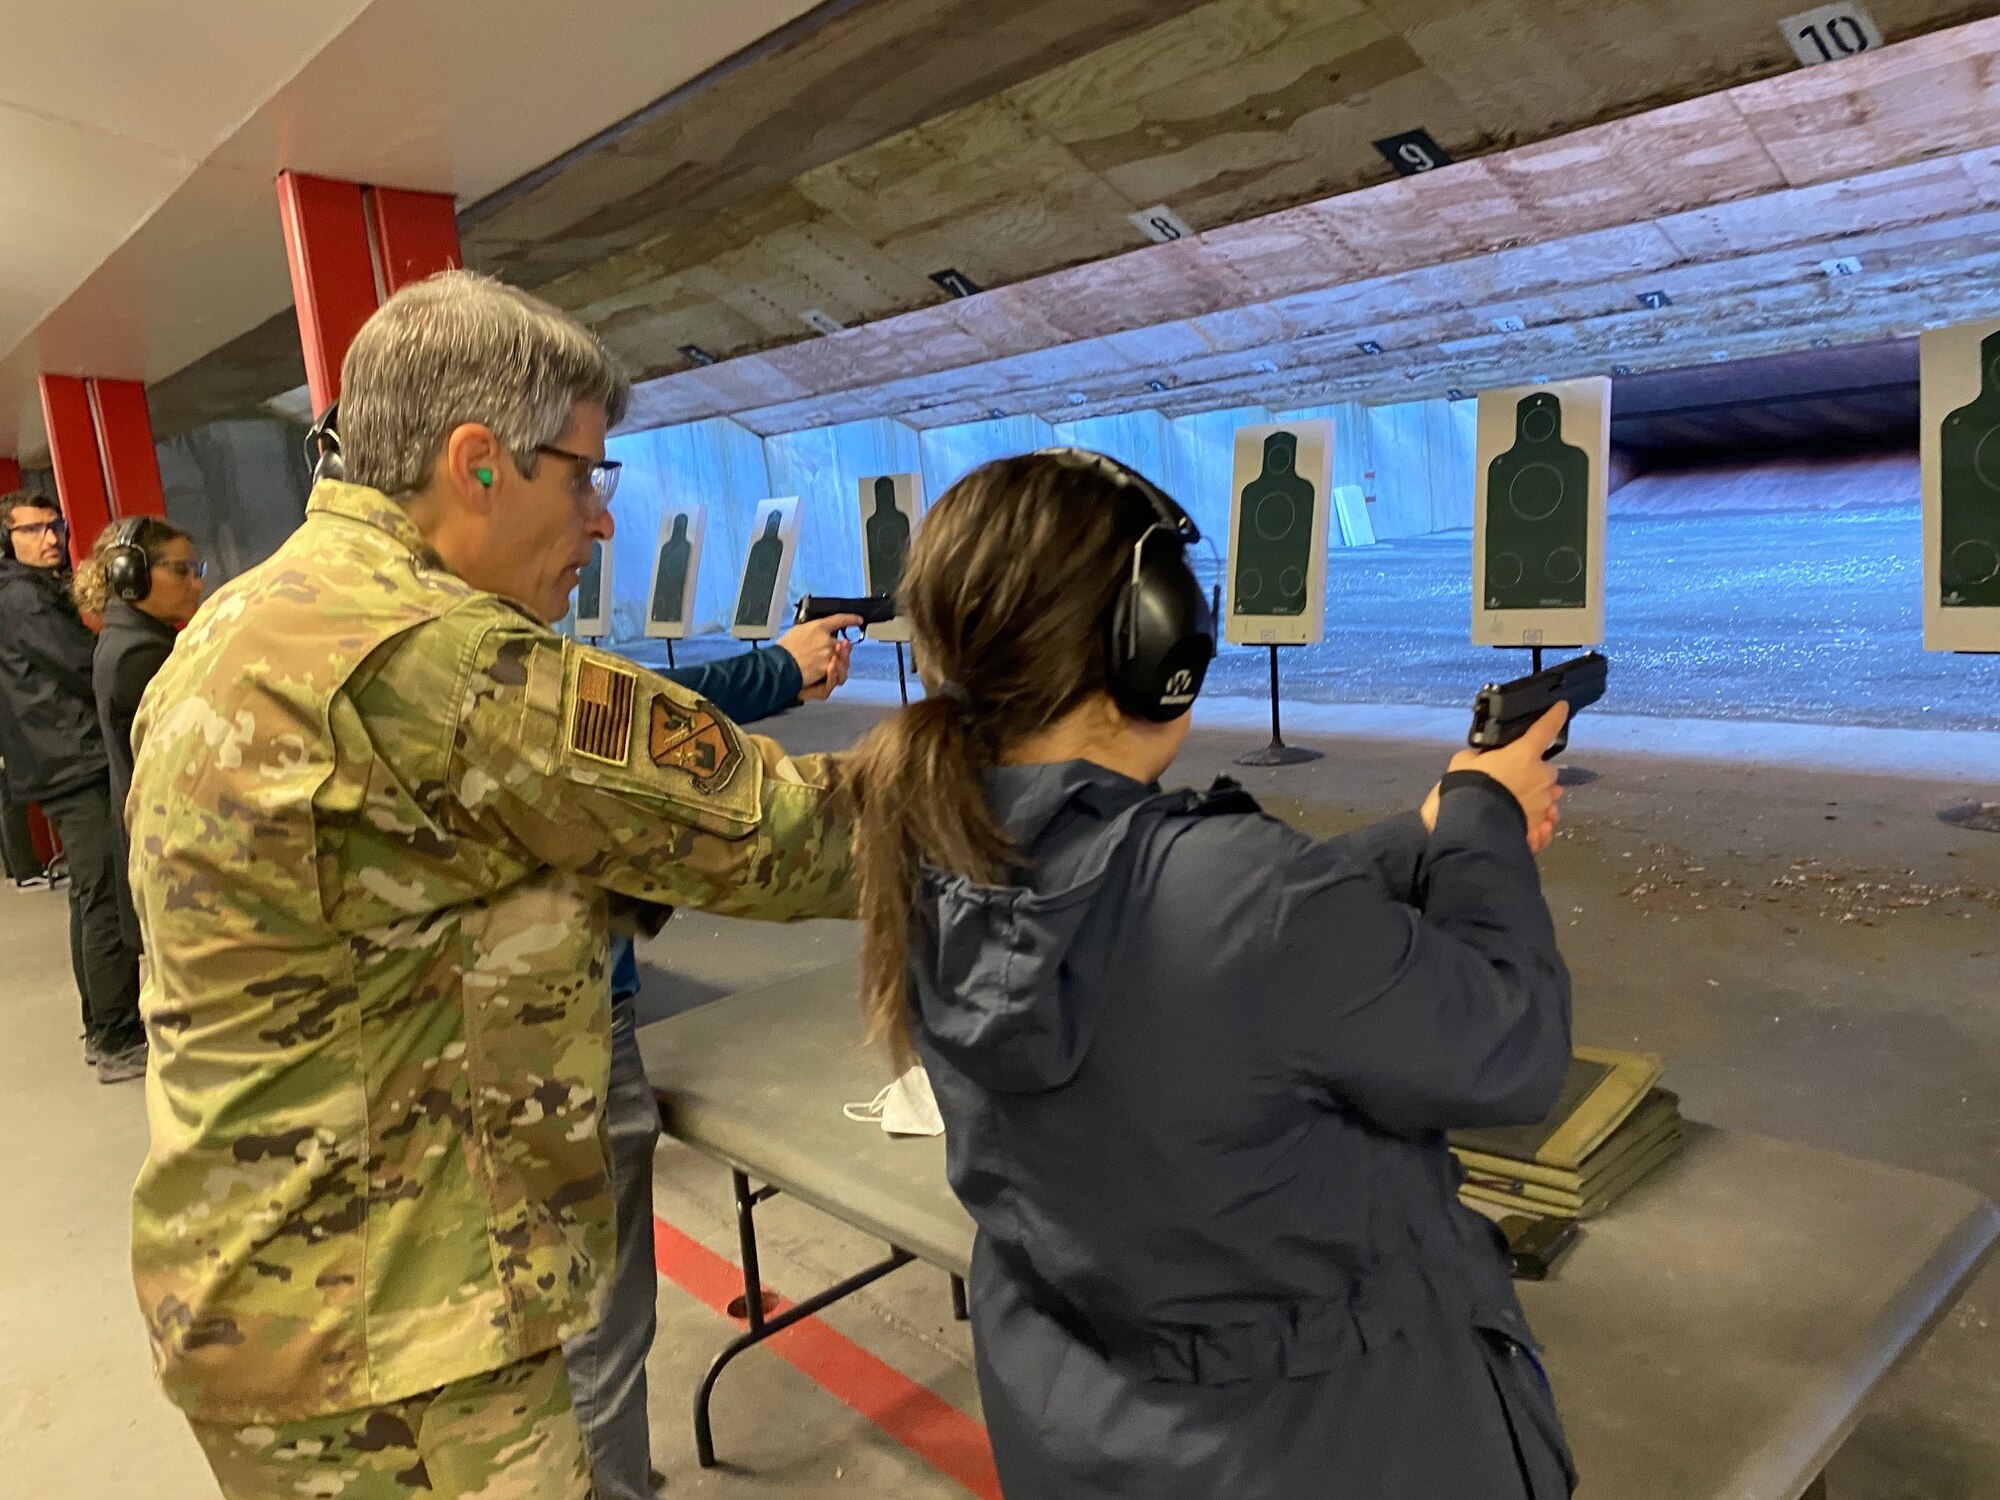 An Air Force Office of Special Investigations Region 5 agent instructs a government civilian, assigned to the U.S. Air Forces in Europe and Air Forces Africa headquarters, in target practice at the firing range on Ramstein Air Base, Germany, May 14, 2021.